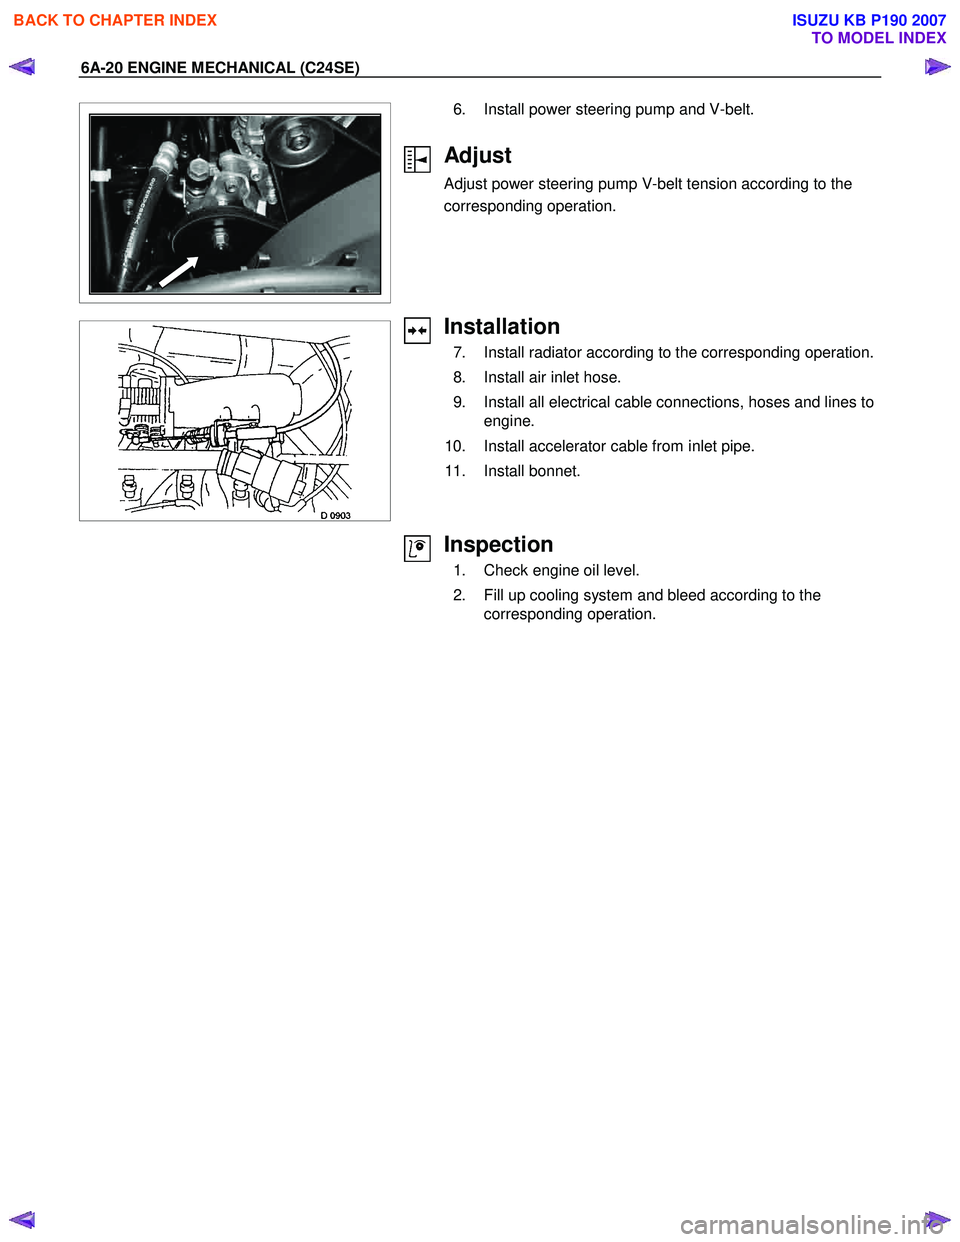 ISUZU KB P190 2007  Workshop Repair Manual 6A-20 ENGINE MECHANICAL (C24SE) 
  
 
 
  
  
  
   6.  Install power steering pump and V-belt.  
 
Adjust 
Adjust power steering pump V-belt tension according to the  
corresponding operation.  
 
 
